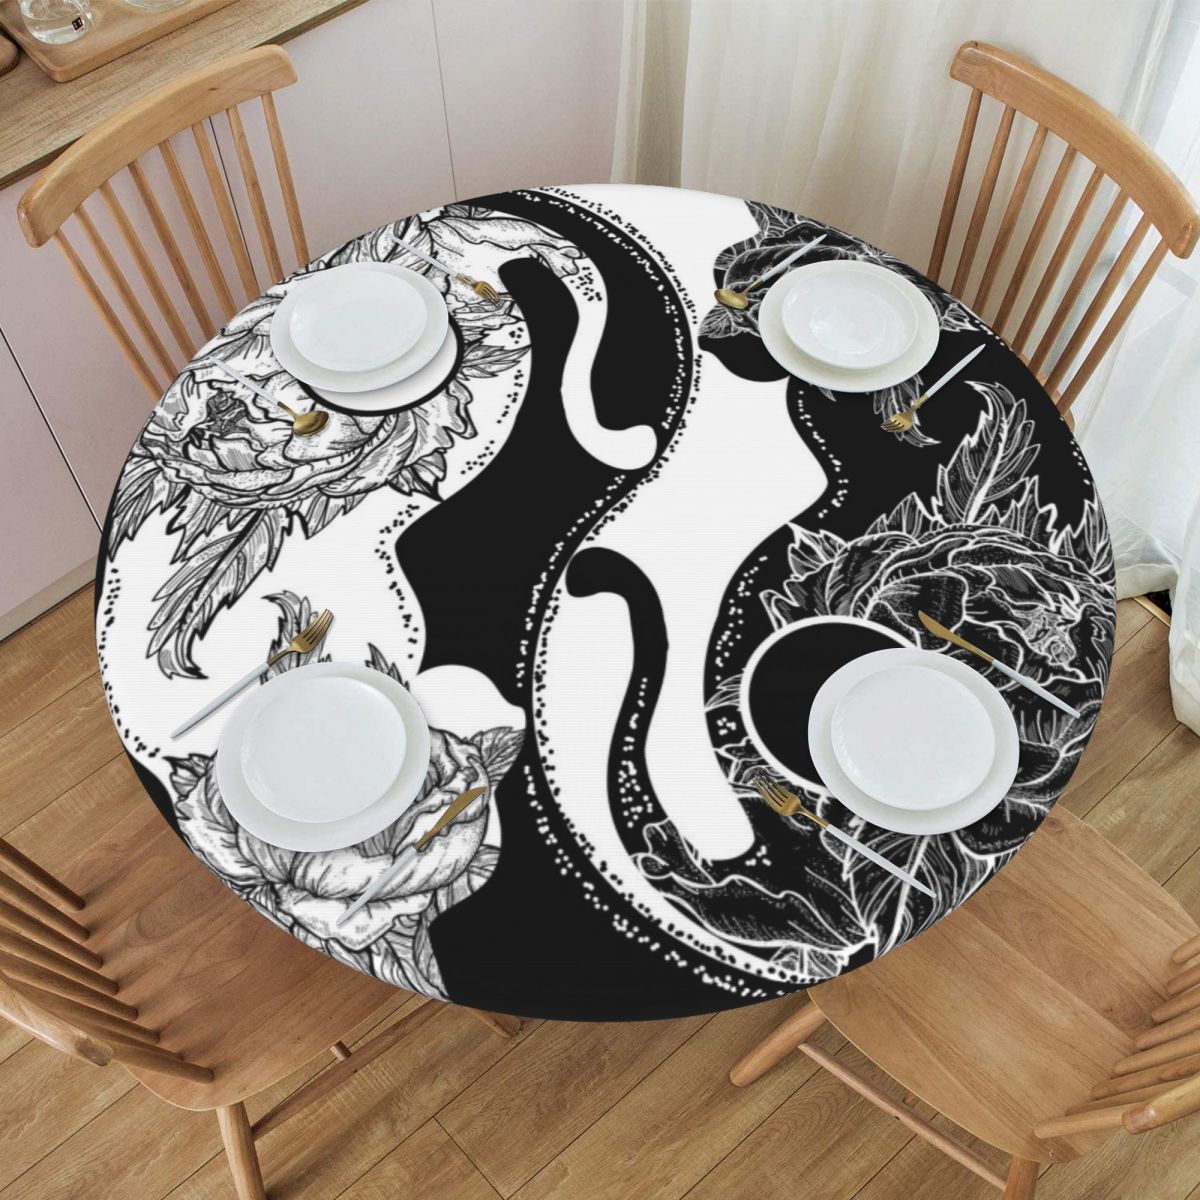 Round Table Cover for Dining Table Elastic Tablecloth Cats Yin And Yang Boho Mandala Fitted House Hotel Decoration - Personal Hour for Yoga and Meditations 